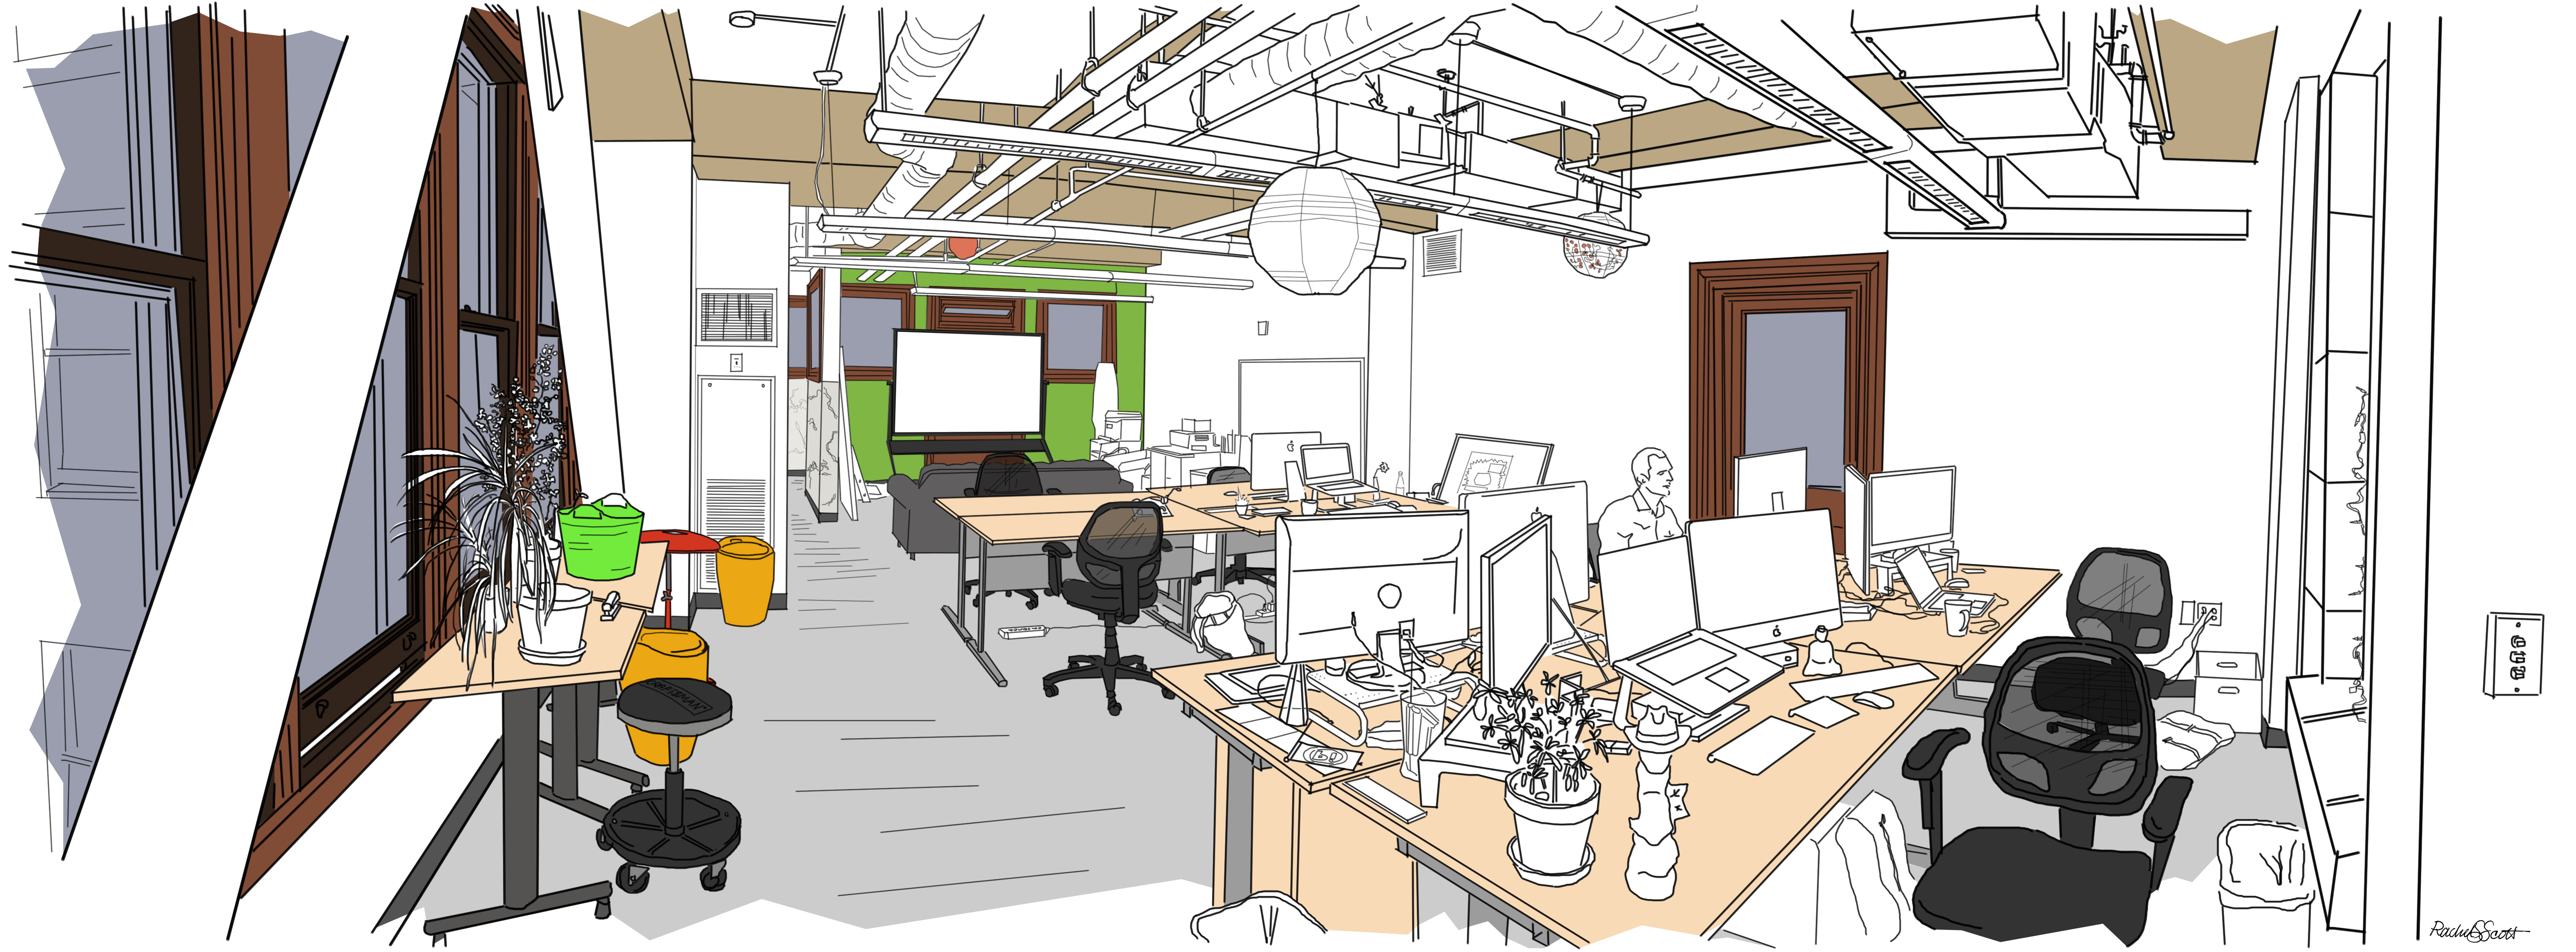 Portent Inc. Creative Services Room: Quick Fixes for Workspaces - Existing Conditions Sketch